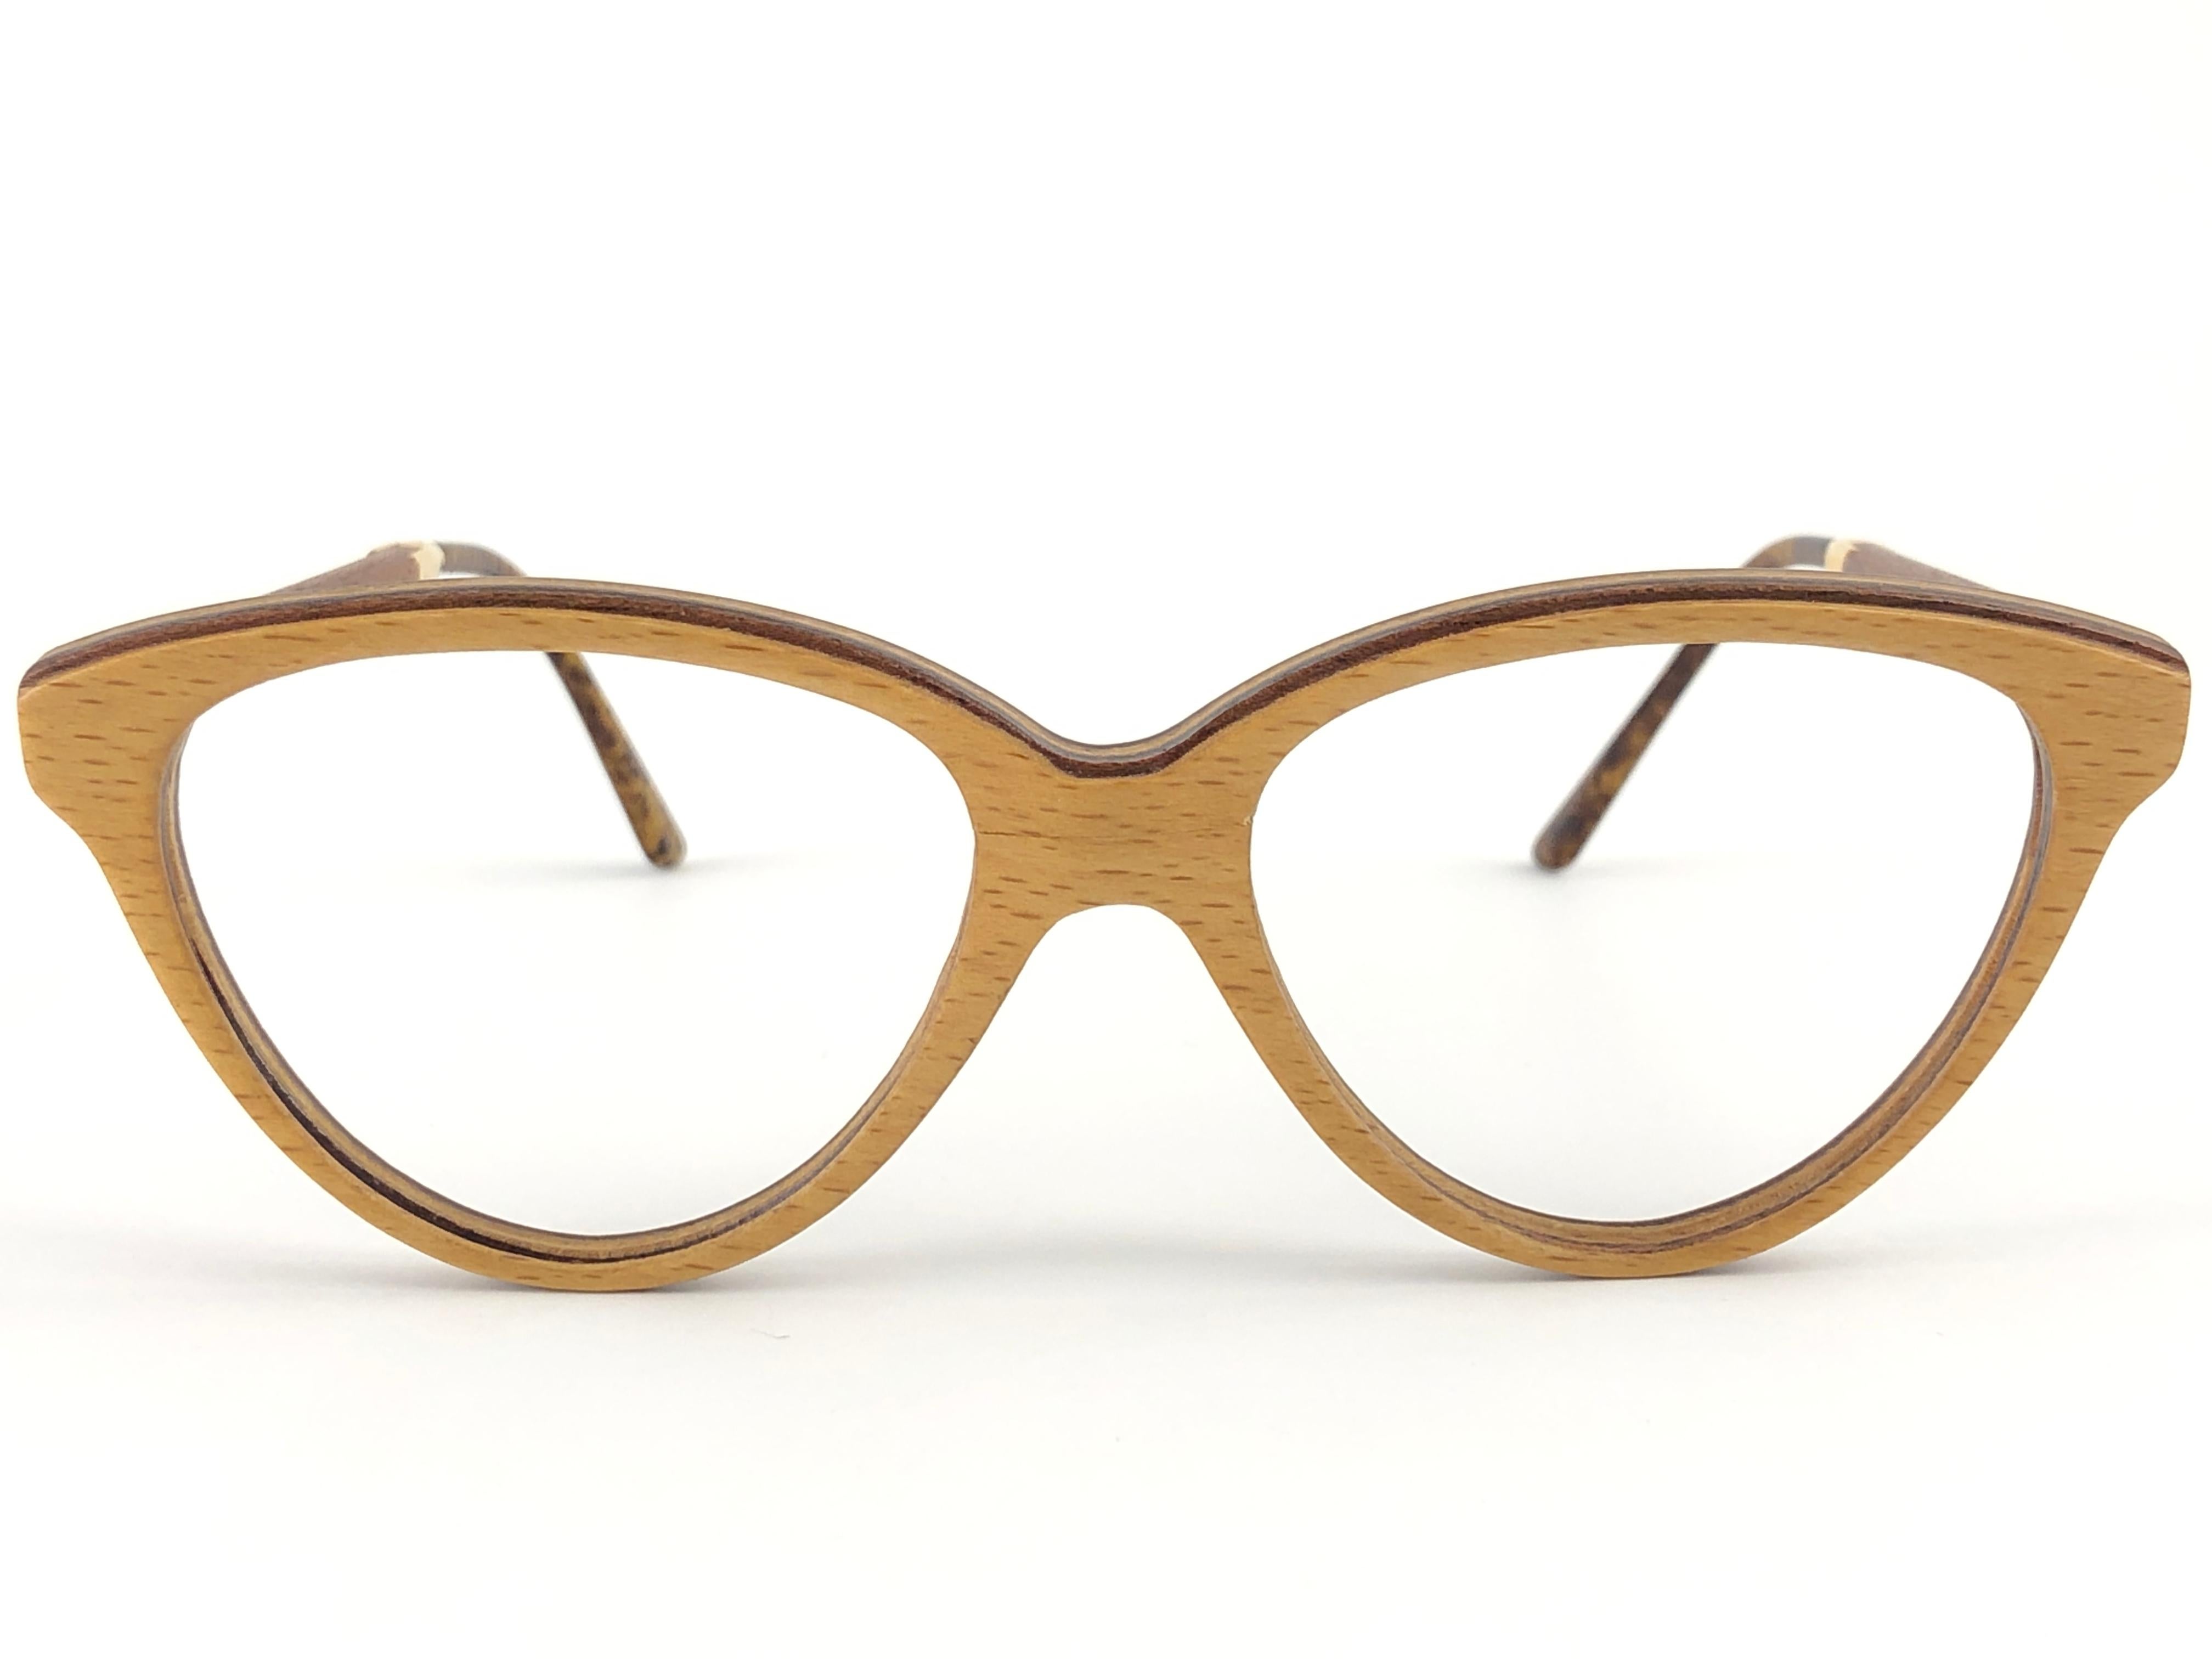 New Vintage Gold & Wood Paris genuine wood frame ready for prescription or reading lenses.
New, never worn or displayed. This pair may have minor sign of wear due to storage. 

Made in France.

Measurements

Frame Width  14 cms
Lens Height  4.2